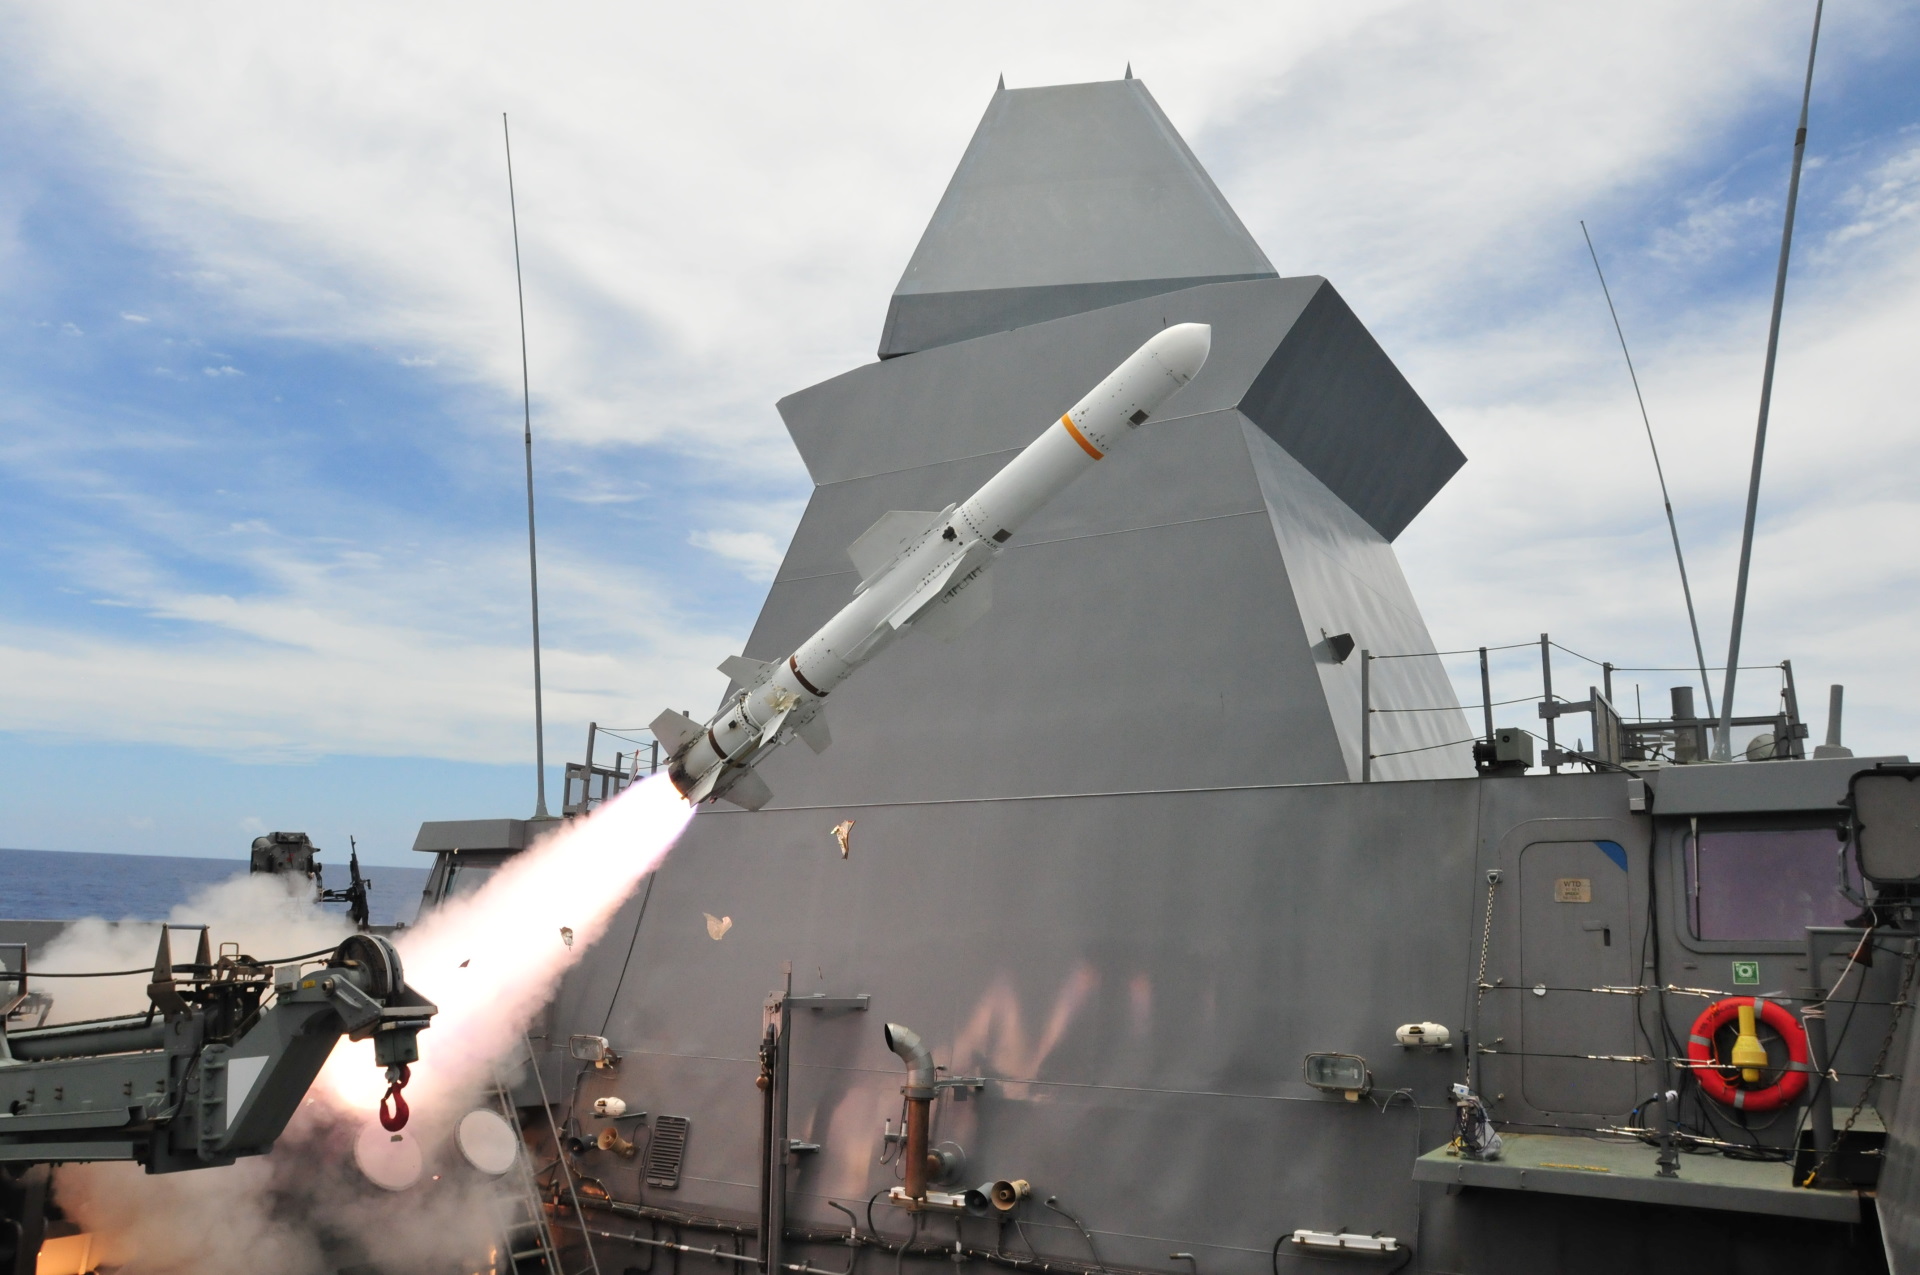 The Republic of Singapore Navy (RSN) frigate RSS Tenacious firing a harpoon anti-ship missile during a coordinated strike with RSS Stalwart and the RSAF fighters, in the waters off Guam during Exercise Pacific Griffin 2021 (XPG21).